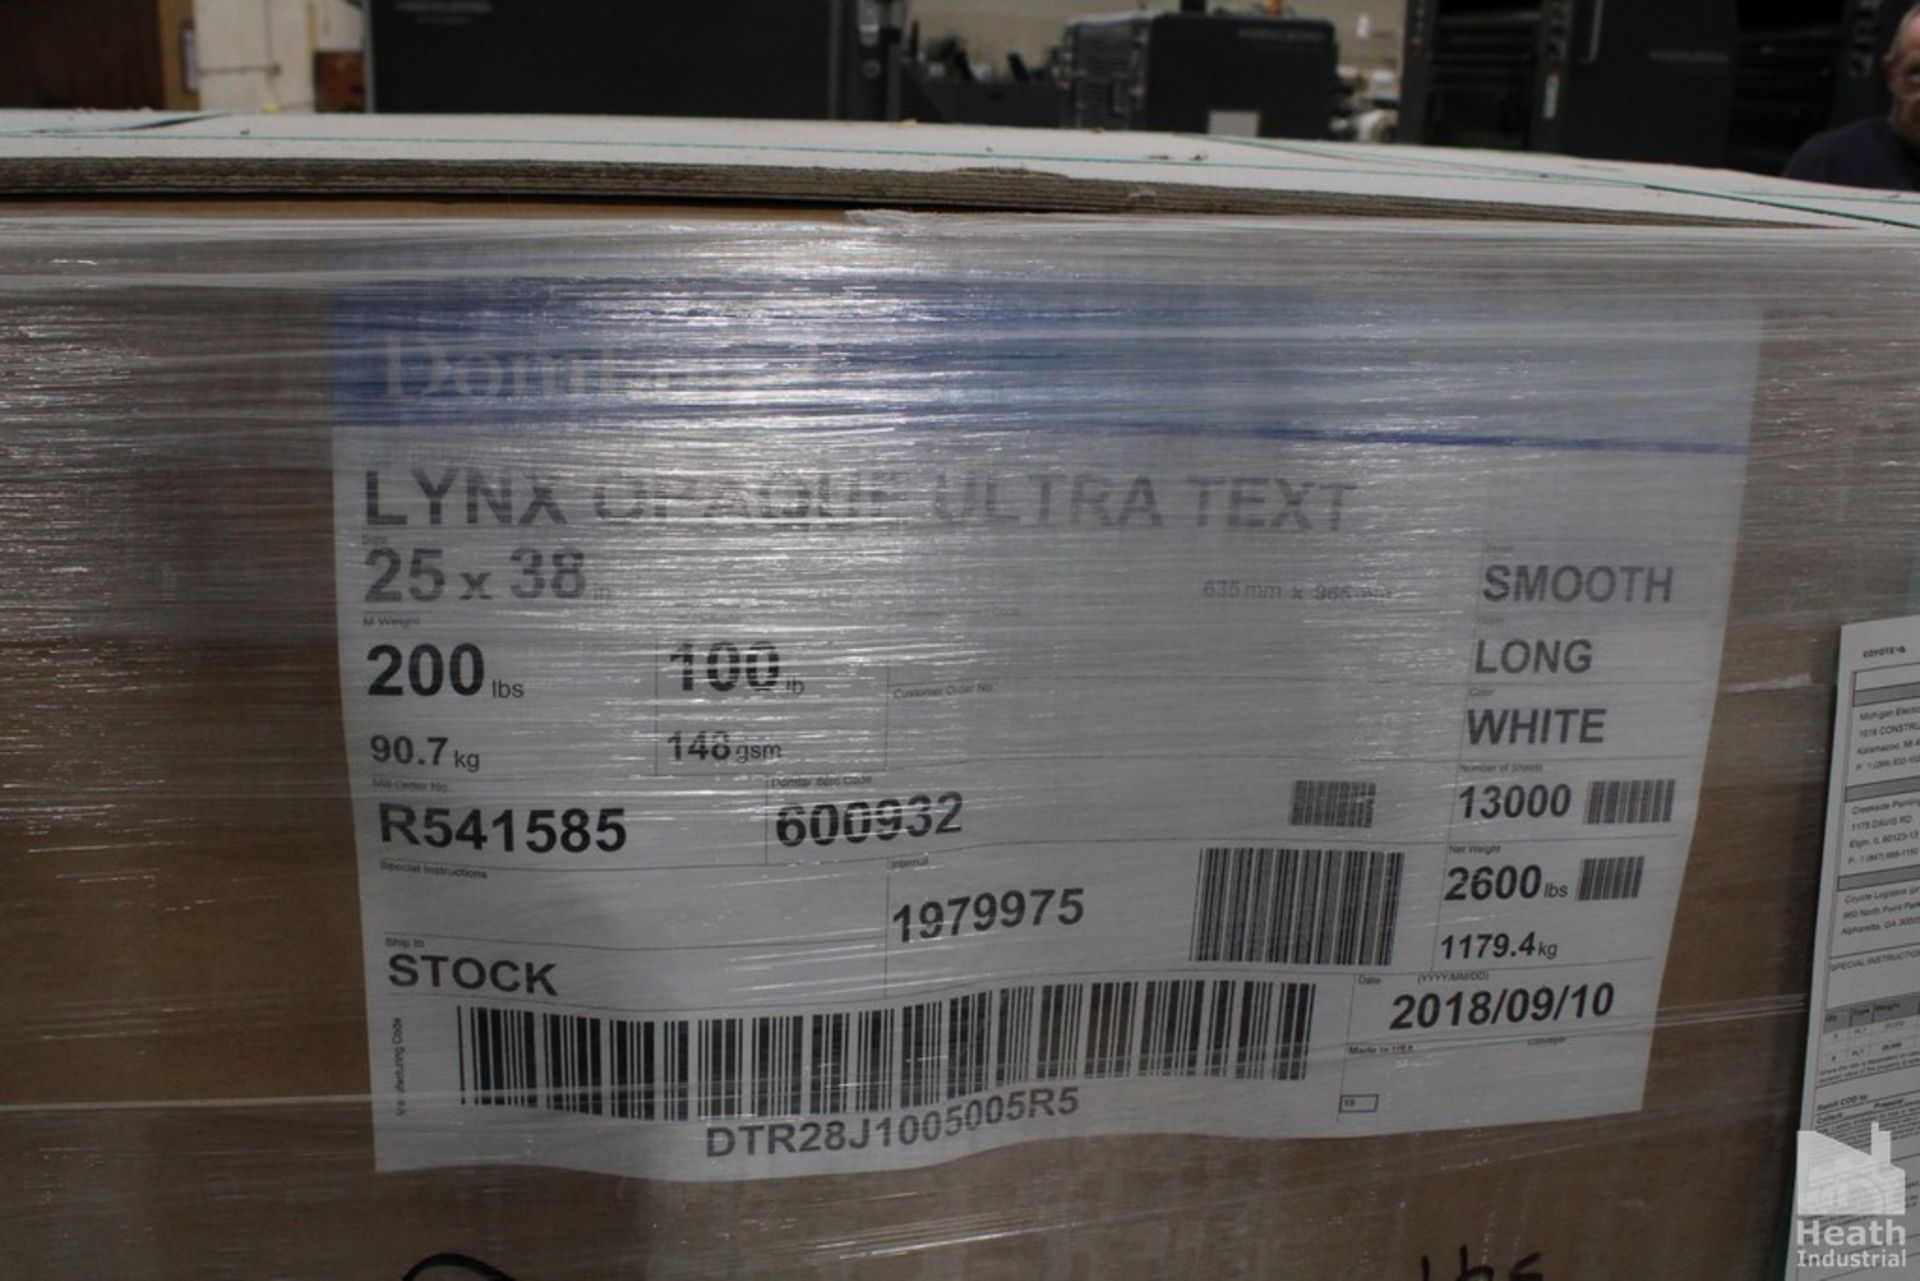 (1) SKID DOMTAR LYNX OPAQUE ULTRA 25" X 38" PAPER APPROXIMATELY 13,000 SHEETS (SEALED) - Image 2 of 2